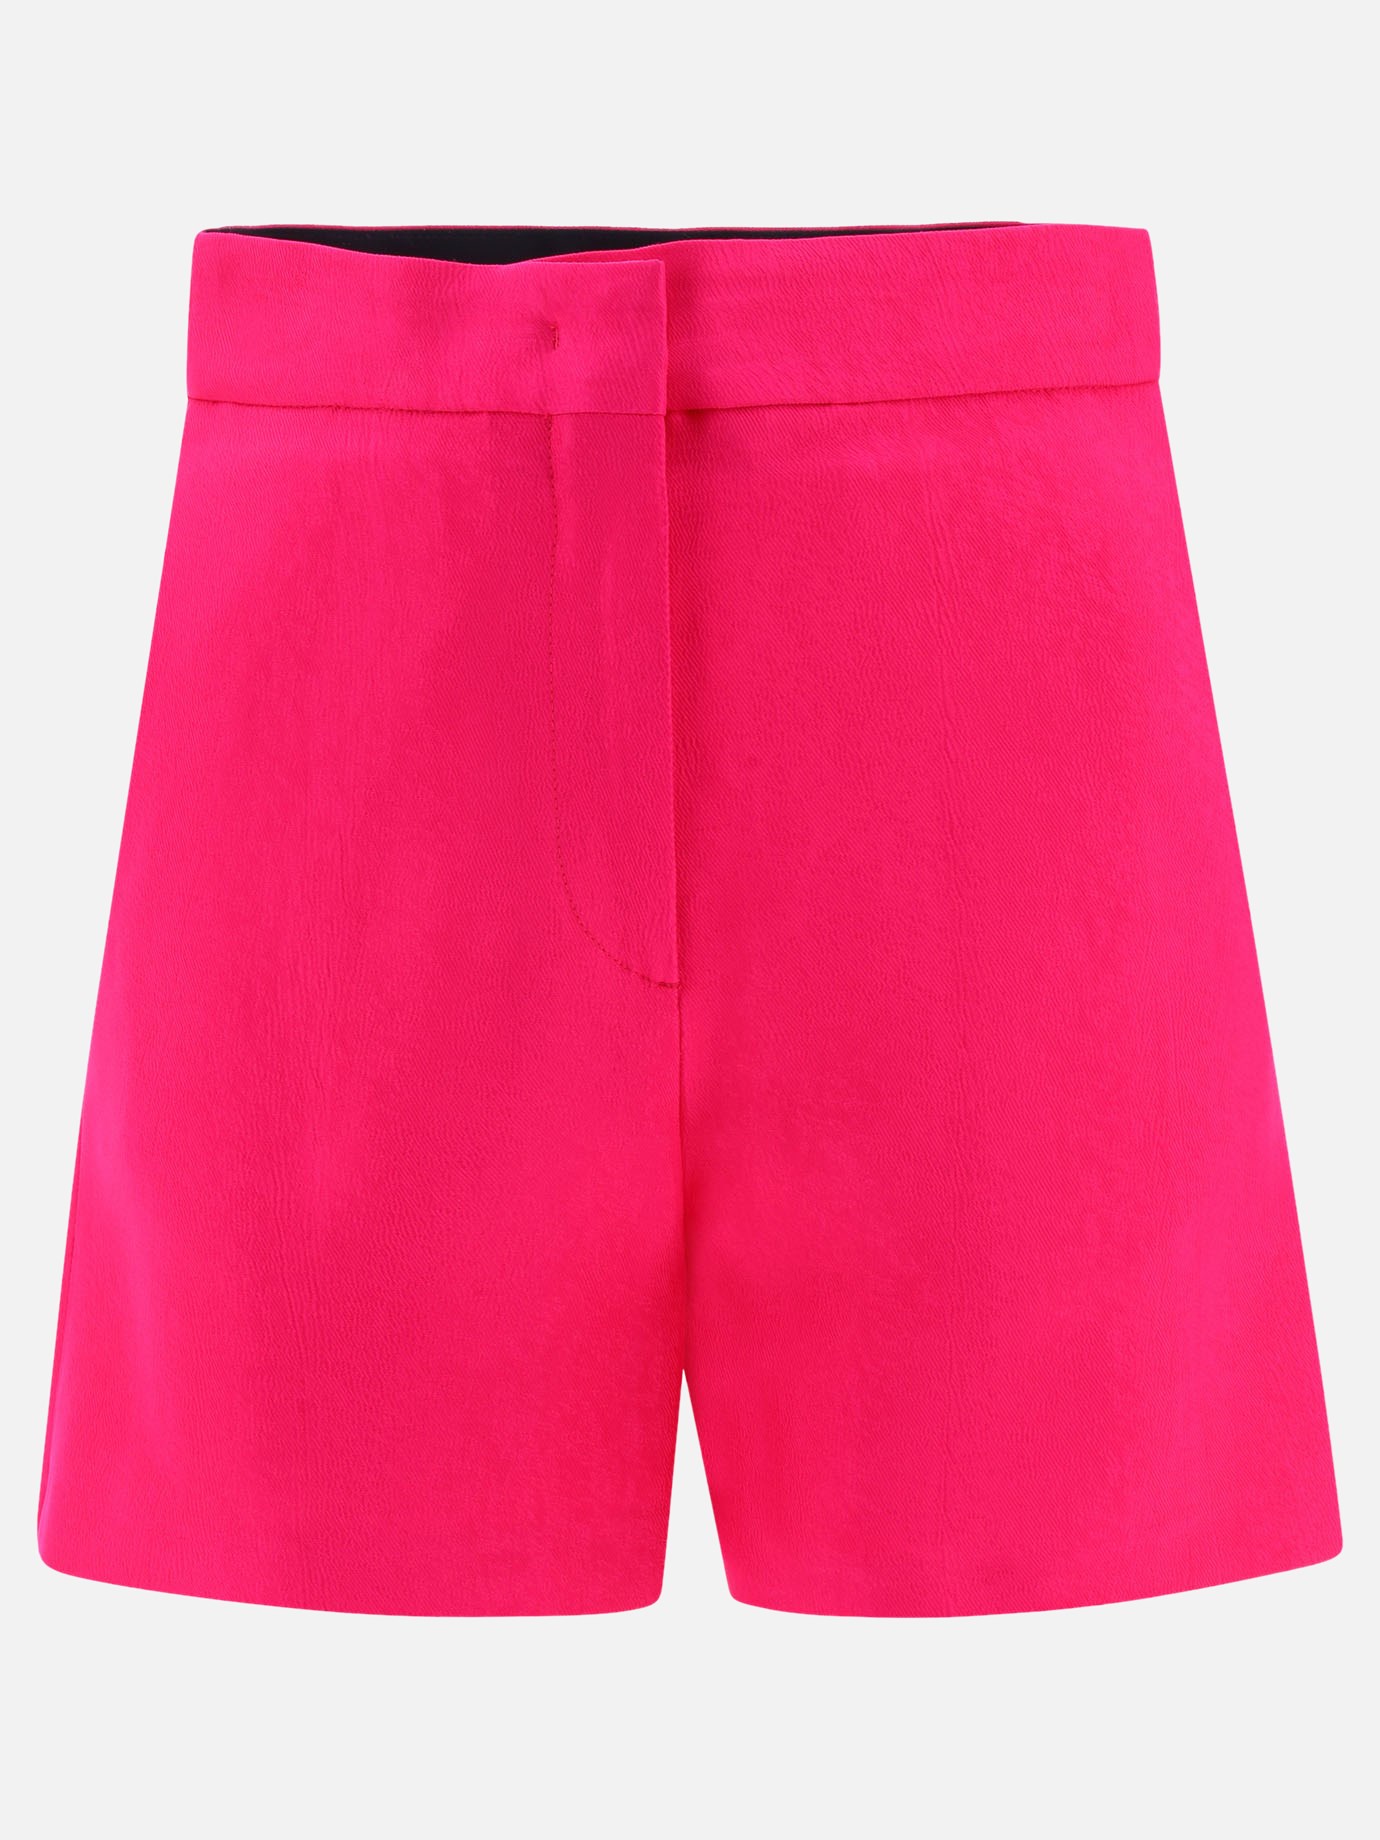 Tailored shortsby Msgm - 4